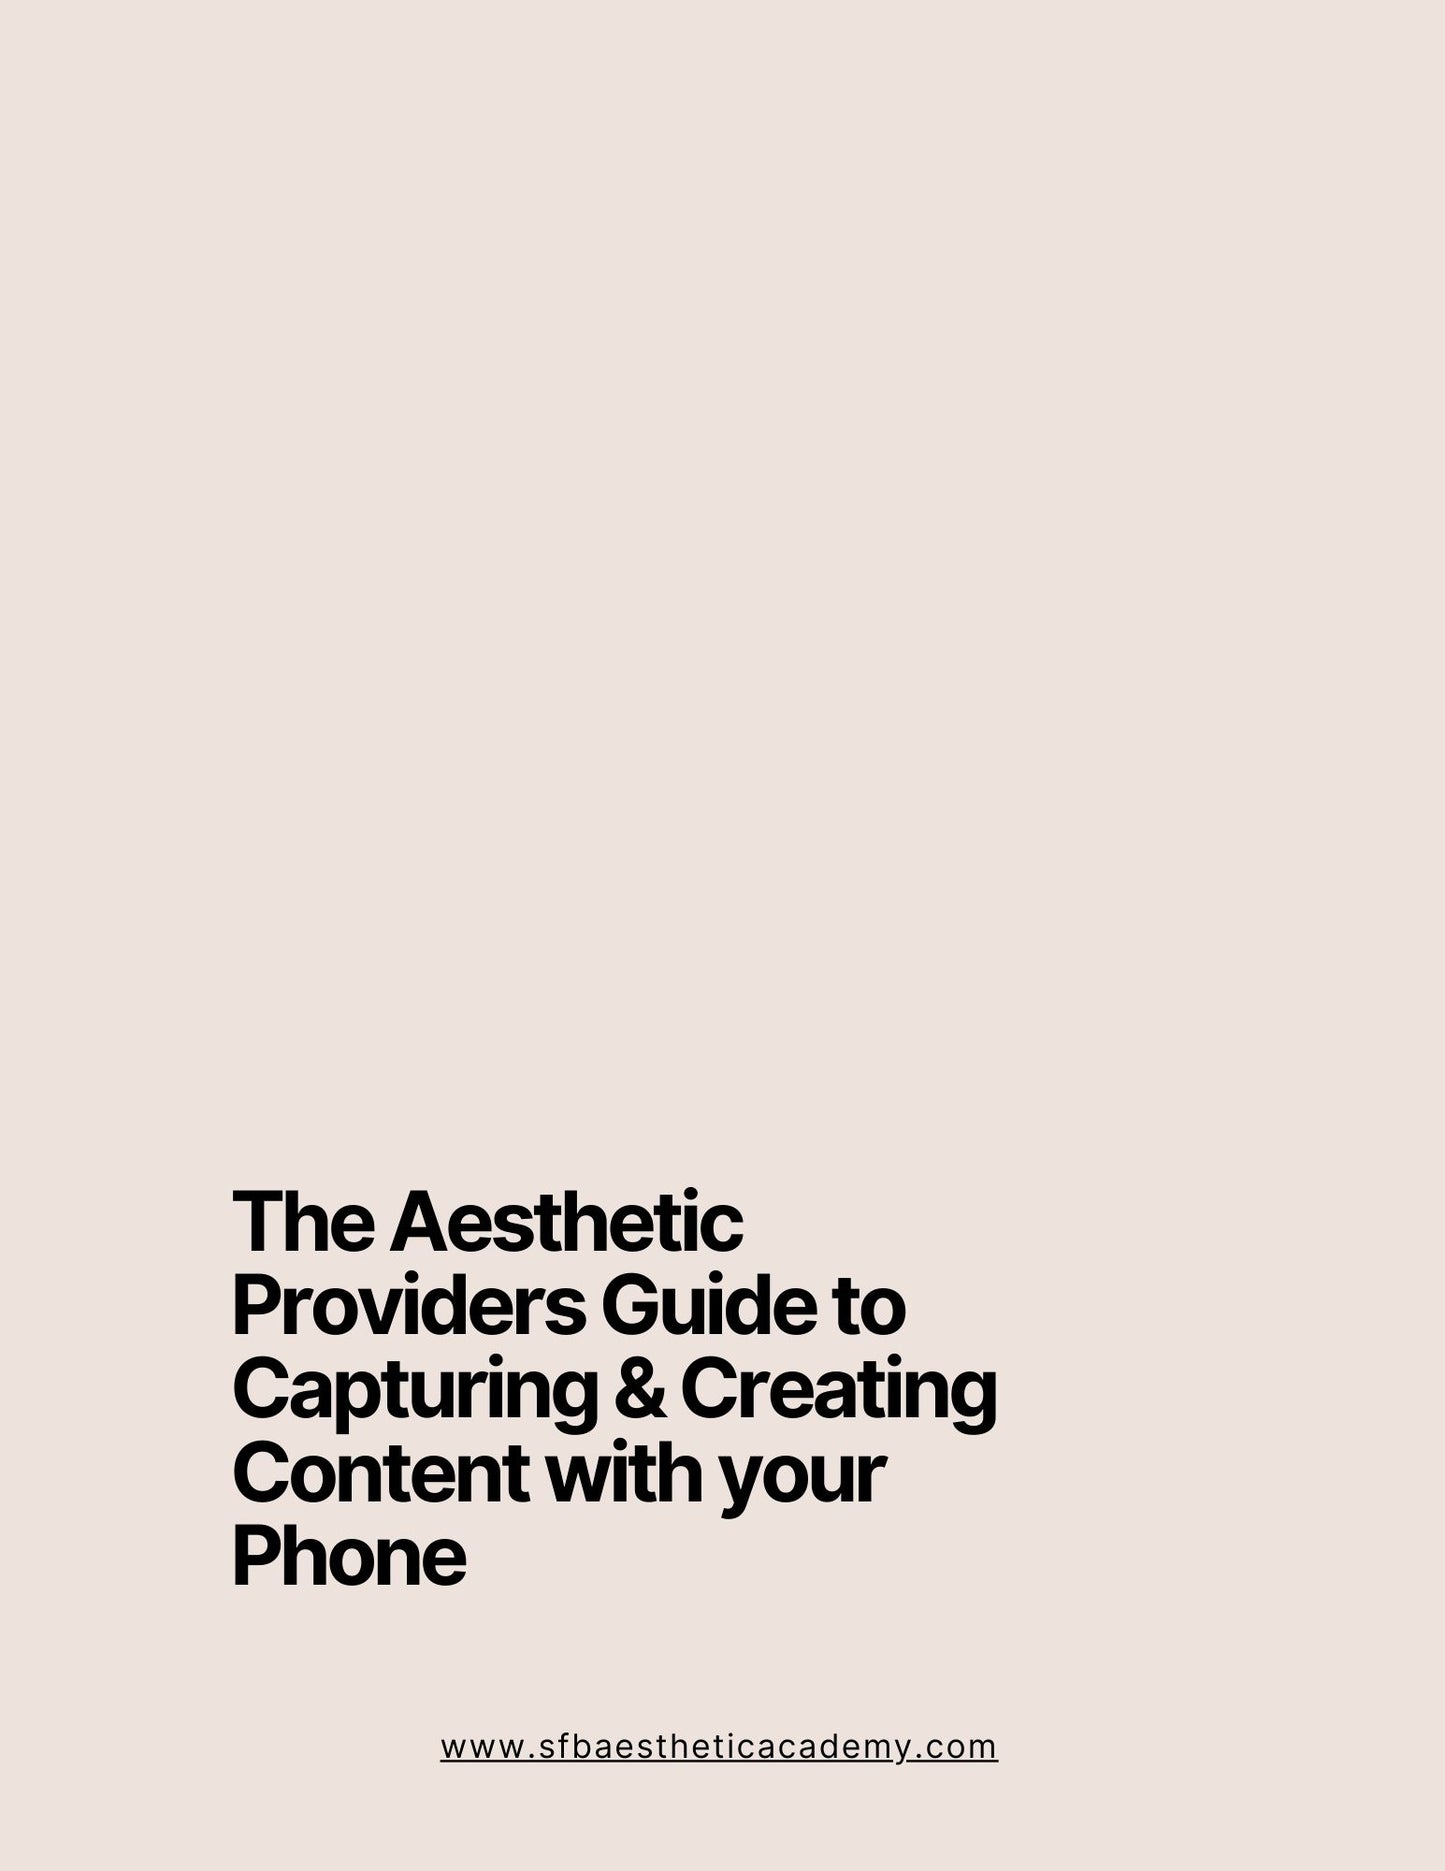 The Aesthetic Provider's Guide to Capturing and Creating Content on Your Phone